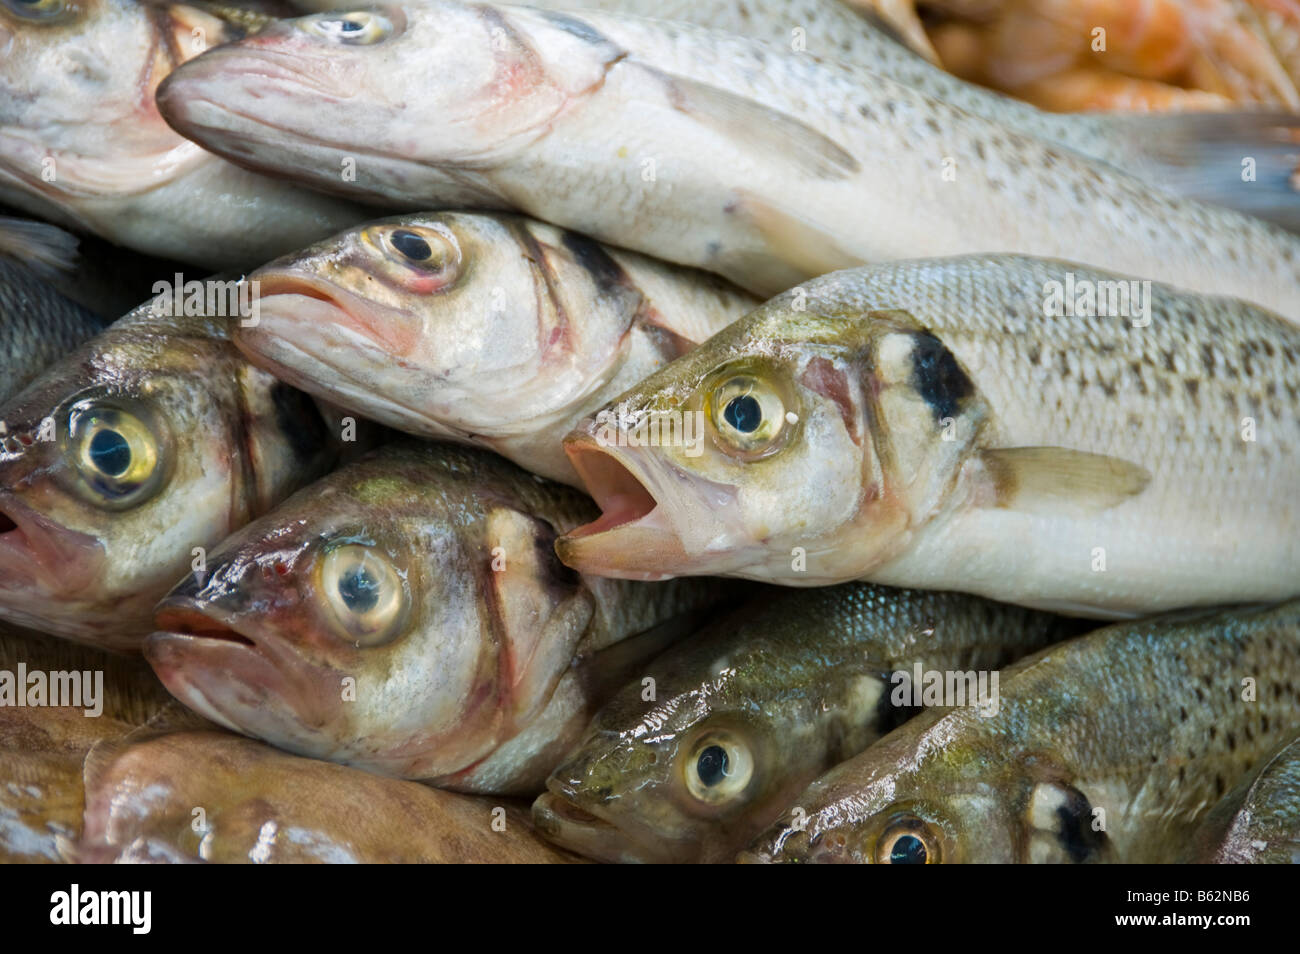 Fish stall in the covered market of Niort Deux Sèvres France Stock Photo